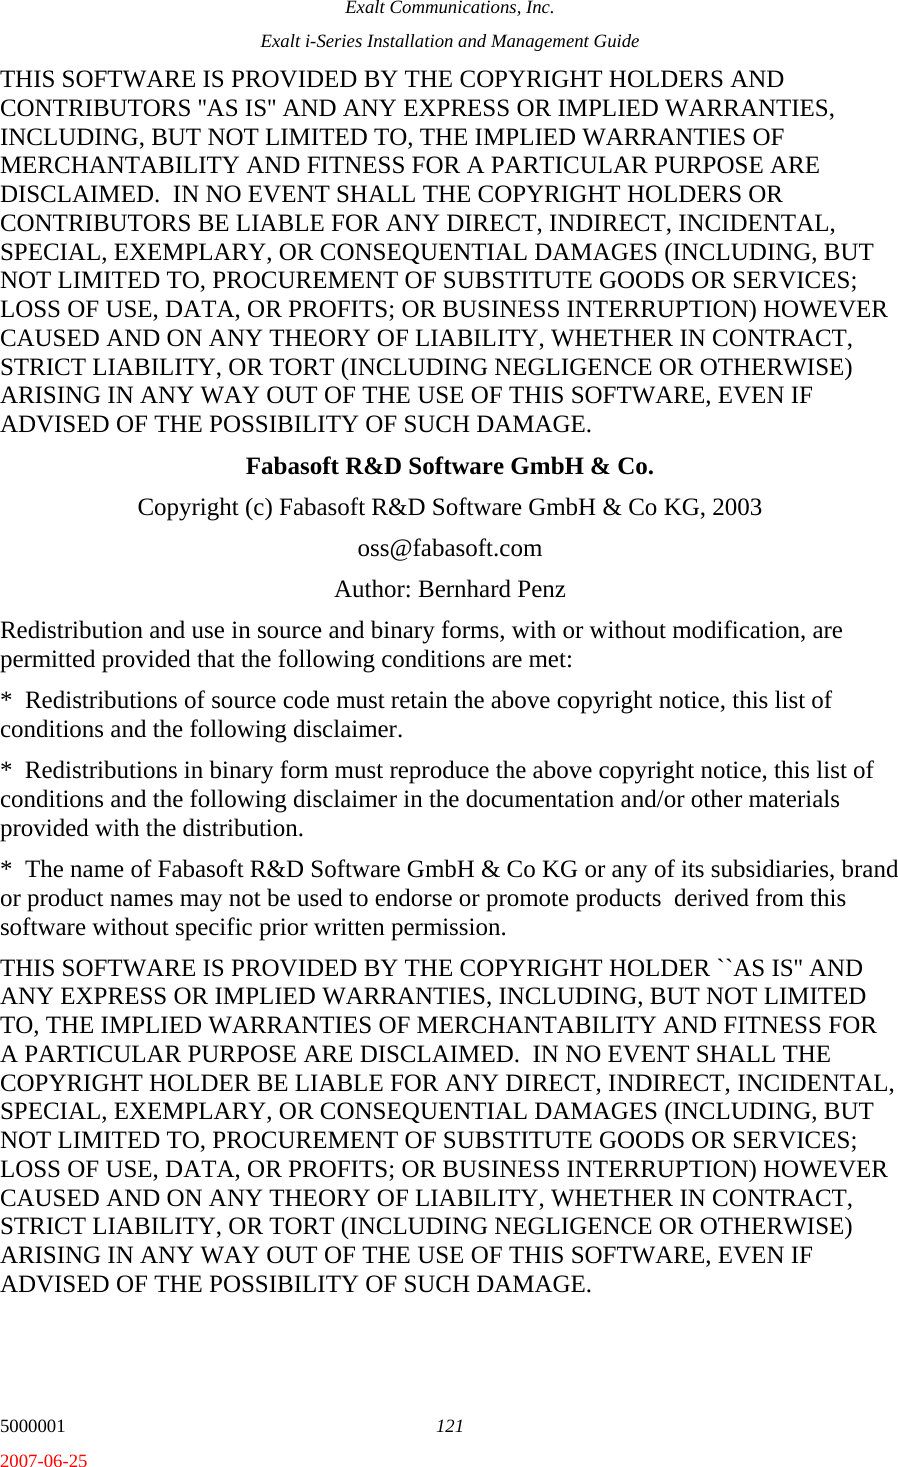 Exalt Communications, Inc. Exalt i-Series Installation and Management Guide 5000001  121 2007-06-25 THIS SOFTWARE IS PROVIDED BY THE COPYRIGHT HOLDERS AND CONTRIBUTORS &apos;&apos;AS IS&apos;&apos; AND ANY EXPRESS OR IMPLIED WARRANTIES, INCLUDING, BUT NOT LIMITED TO, THE IMPLIED WARRANTIES OF MERCHANTABILITY AND FITNESS FOR A PARTICULAR PURPOSE ARE DISCLAIMED.  IN NO EVENT SHALL THE COPYRIGHT HOLDERS OR CONTRIBUTORS BE LIABLE FOR ANY DIRECT, INDIRECT, INCIDENTAL, SPECIAL, EXEMPLARY, OR CONSEQUENTIAL DAMAGES (INCLUDING, BUT NOT LIMITED TO, PROCUREMENT OF SUBSTITUTE GOODS OR SERVICES; LOSS OF USE, DATA, OR PROFITS; OR BUSINESS INTERRUPTION) HOWEVER CAUSED AND ON ANY THEORY OF LIABILITY, WHETHER IN CONTRACT, STRICT LIABILITY, OR TORT (INCLUDING NEGLIGENCE OR OTHERWISE) ARISING IN ANY WAY OUT OF THE USE OF THIS SOFTWARE, EVEN IF ADVISED OF THE POSSIBILITY OF SUCH DAMAGE. Fabasoft R&amp;D Software GmbH &amp; Co. Copyright (c) Fabasoft R&amp;D Software GmbH &amp; Co KG, 2003 oss@fabasoft.com Author: Bernhard Penz Redistribution and use in source and binary forms, with or without modification, are permitted provided that the following conditions are met: *  Redistributions of source code must retain the above copyright notice, this list of conditions and the following disclaimer. *  Redistributions in binary form must reproduce the above copyright notice, this list of conditions and the following disclaimer in the documentation and/or other materials provided with the distribution. *  The name of Fabasoft R&amp;D Software GmbH &amp; Co KG or any of its subsidiaries, brand or product names may not be used to endorse or promote products  derived from this software without specific prior written permission. THIS SOFTWARE IS PROVIDED BY THE COPYRIGHT HOLDER ``AS IS&apos;&apos; AND ANY EXPRESS OR IMPLIED WARRANTIES, INCLUDING, BUT NOT LIMITED TO, THE IMPLIED WARRANTIES OF MERCHANTABILITY AND FITNESS FOR A PARTICULAR PURPOSE ARE DISCLAIMED.  IN NO EVENT SHALL THE COPYRIGHT HOLDER BE LIABLE FOR ANY DIRECT, INDIRECT, INCIDENTAL, SPECIAL, EXEMPLARY, OR CONSEQUENTIAL DAMAGES (INCLUDING, BUT NOT LIMITED TO, PROCUREMENT OF SUBSTITUTE GOODS OR SERVICES; LOSS OF USE, DATA, OR PROFITS; OR BUSINESS INTERRUPTION) HOWEVER CAUSED AND ON ANY THEORY OF LIABILITY, WHETHER IN CONTRACT, STRICT LIABILITY, OR TORT (INCLUDING NEGLIGENCE OR OTHERWISE) ARISING IN ANY WAY OUT OF THE USE OF THIS SOFTWARE, EVEN IF ADVISED OF THE POSSIBILITY OF SUCH DAMAGE.   